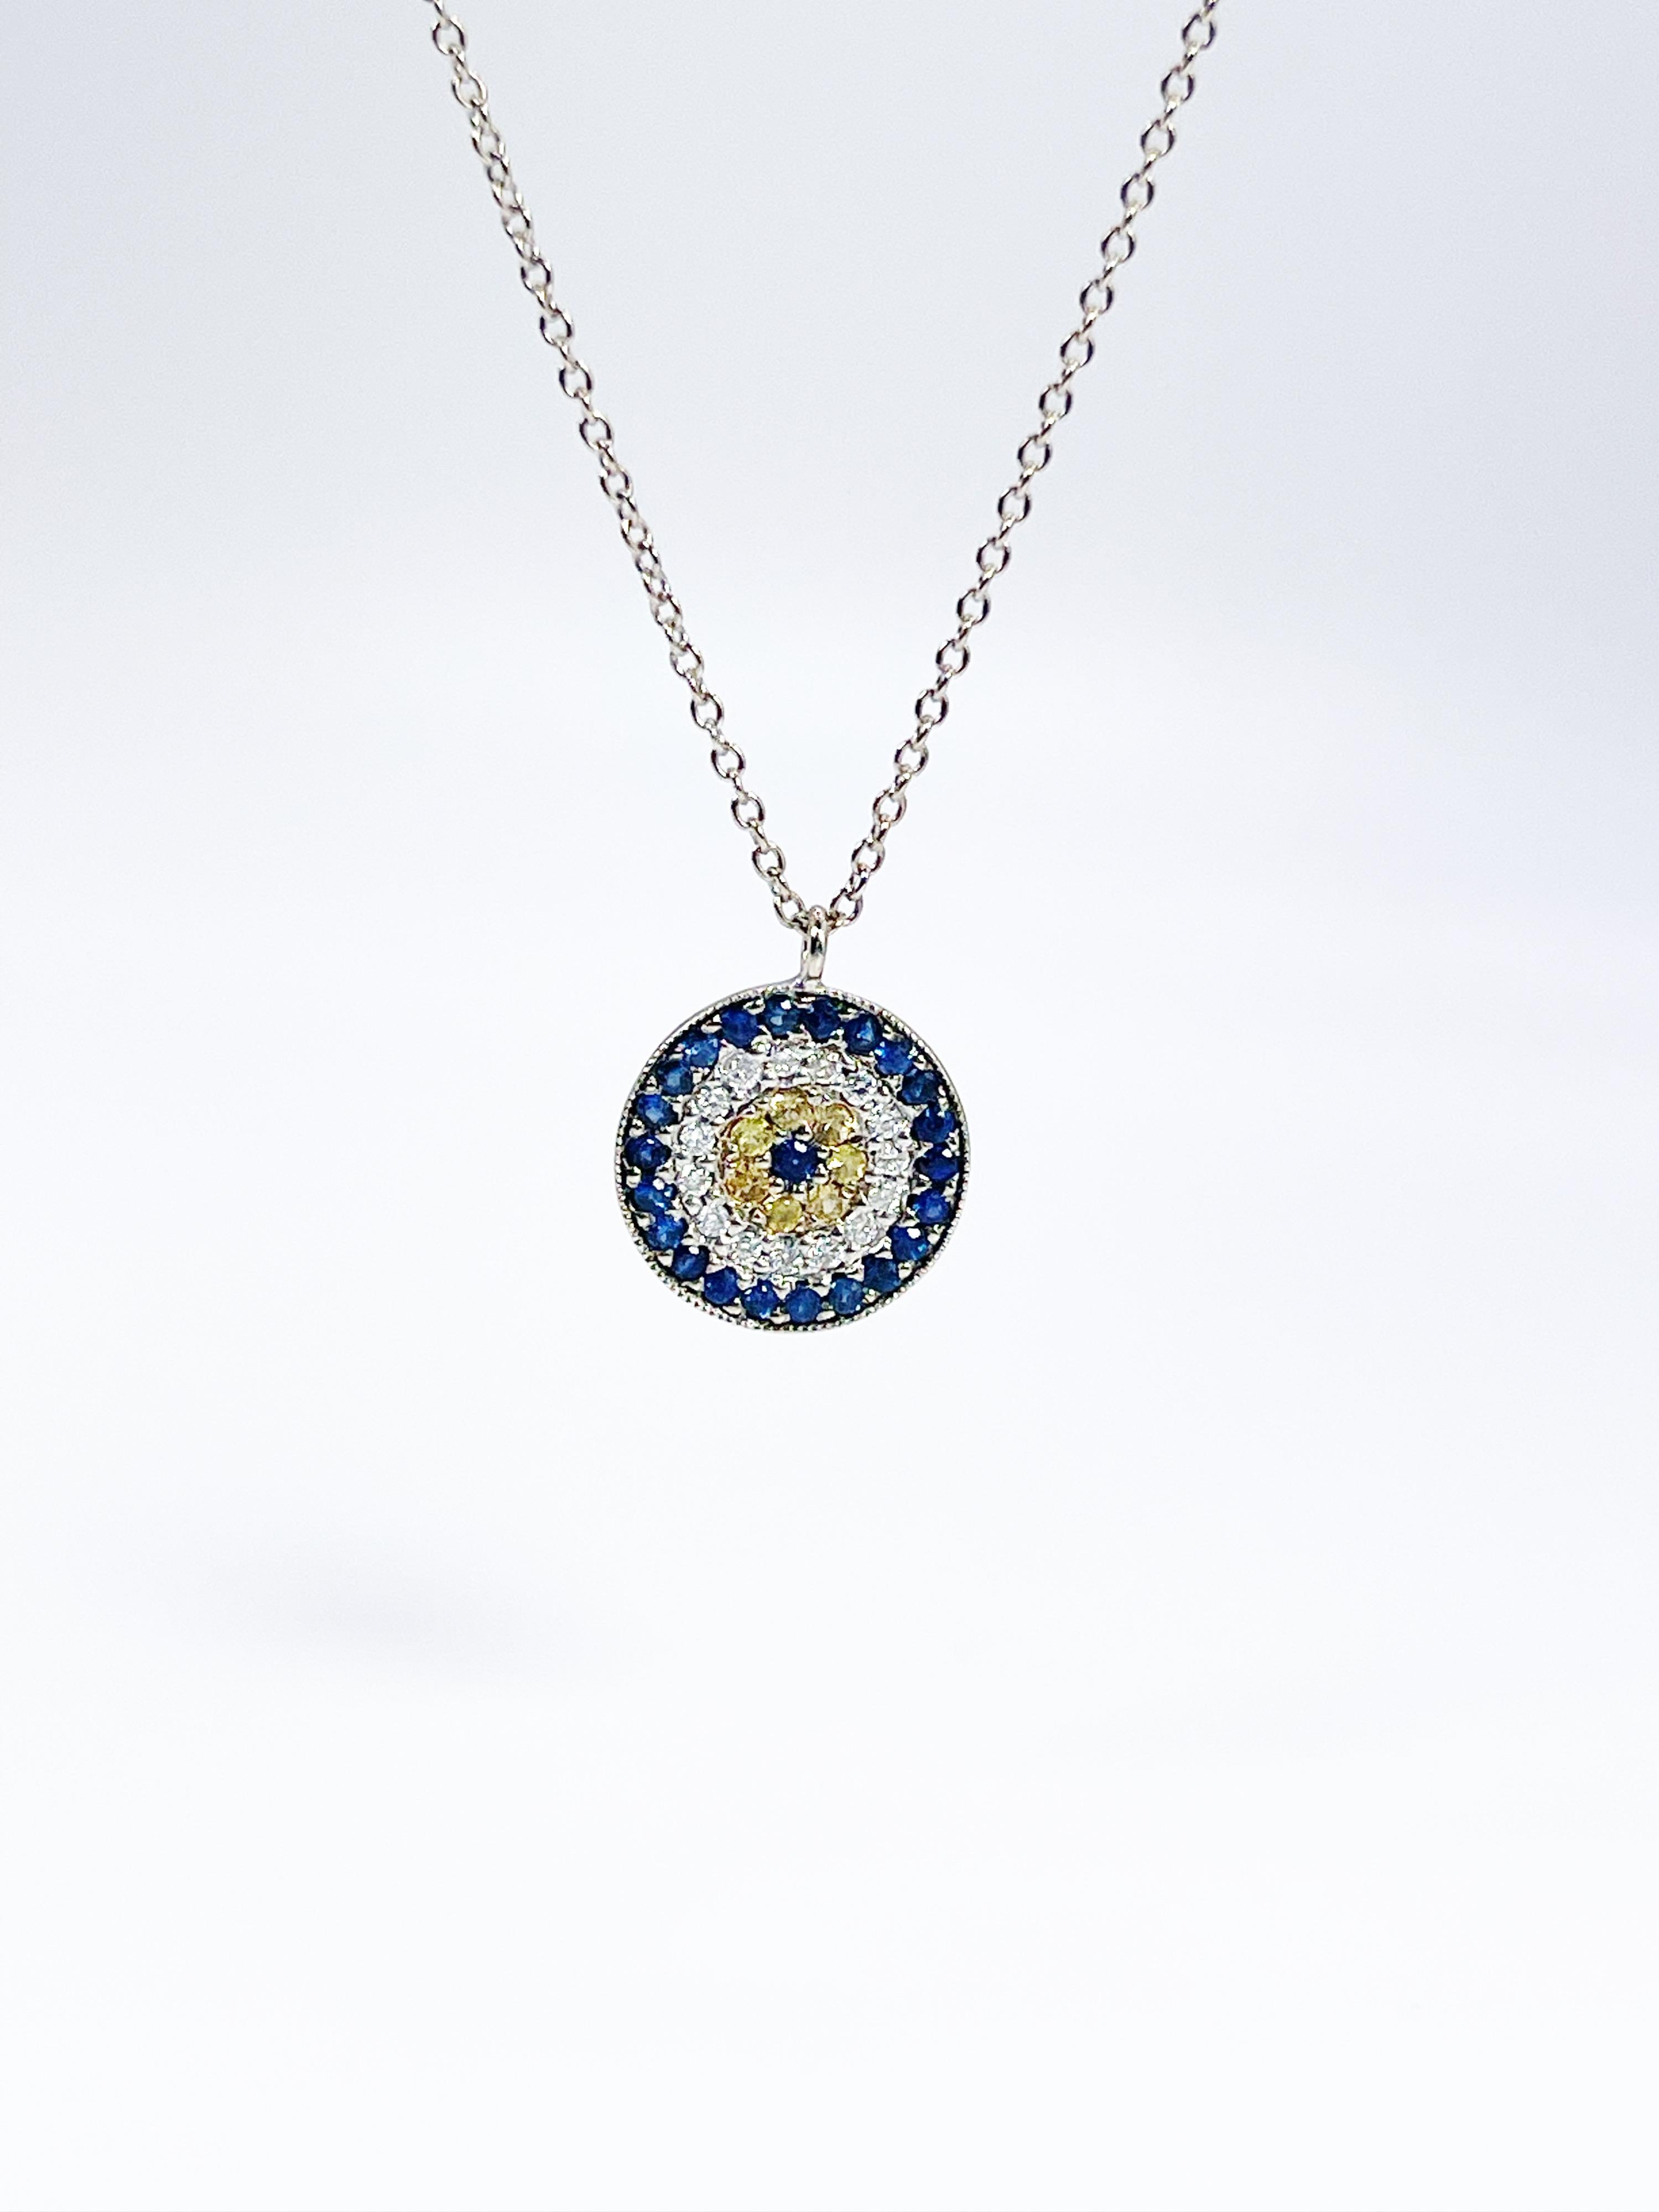 Evil eye pendant necklace made with yellow sapphire, white diamonds and blue sapphires in 14 Karat gold.

GRAM WEIGHT: 2gr
GOLD: 14KT white gold
NATURAL SAPPHIRE
Cut: Round
Color: Blue, Yellow
Clarity: Slightly Included
Carat:0.20ct

NATURAL